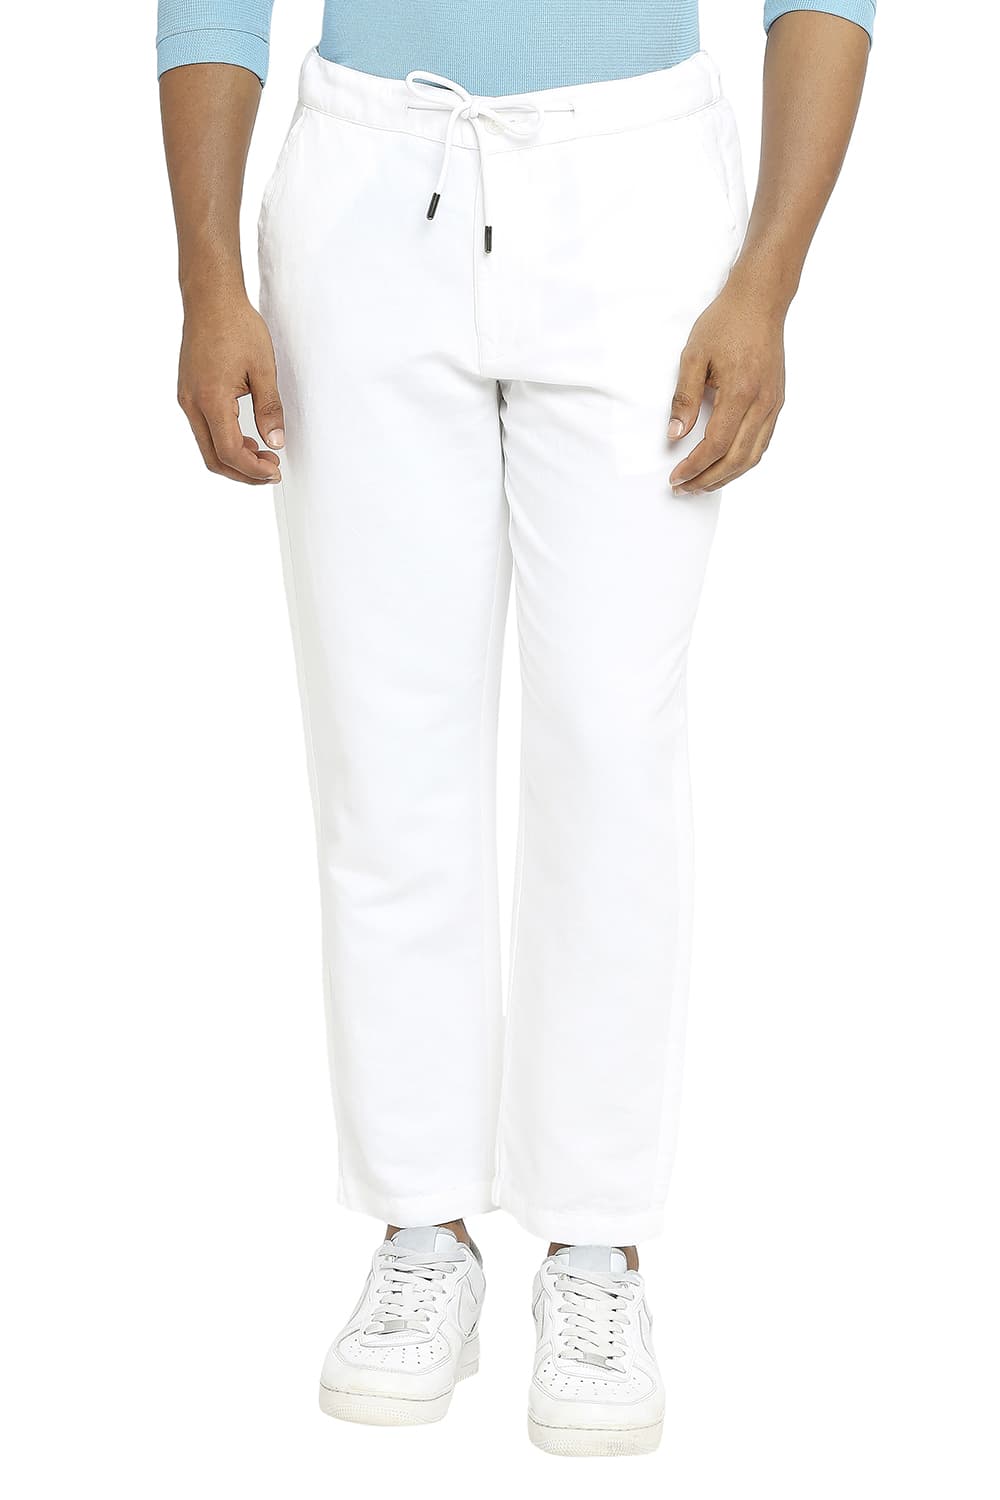 BASICS RELAXED FIT LINEN COTTON TROUSERS